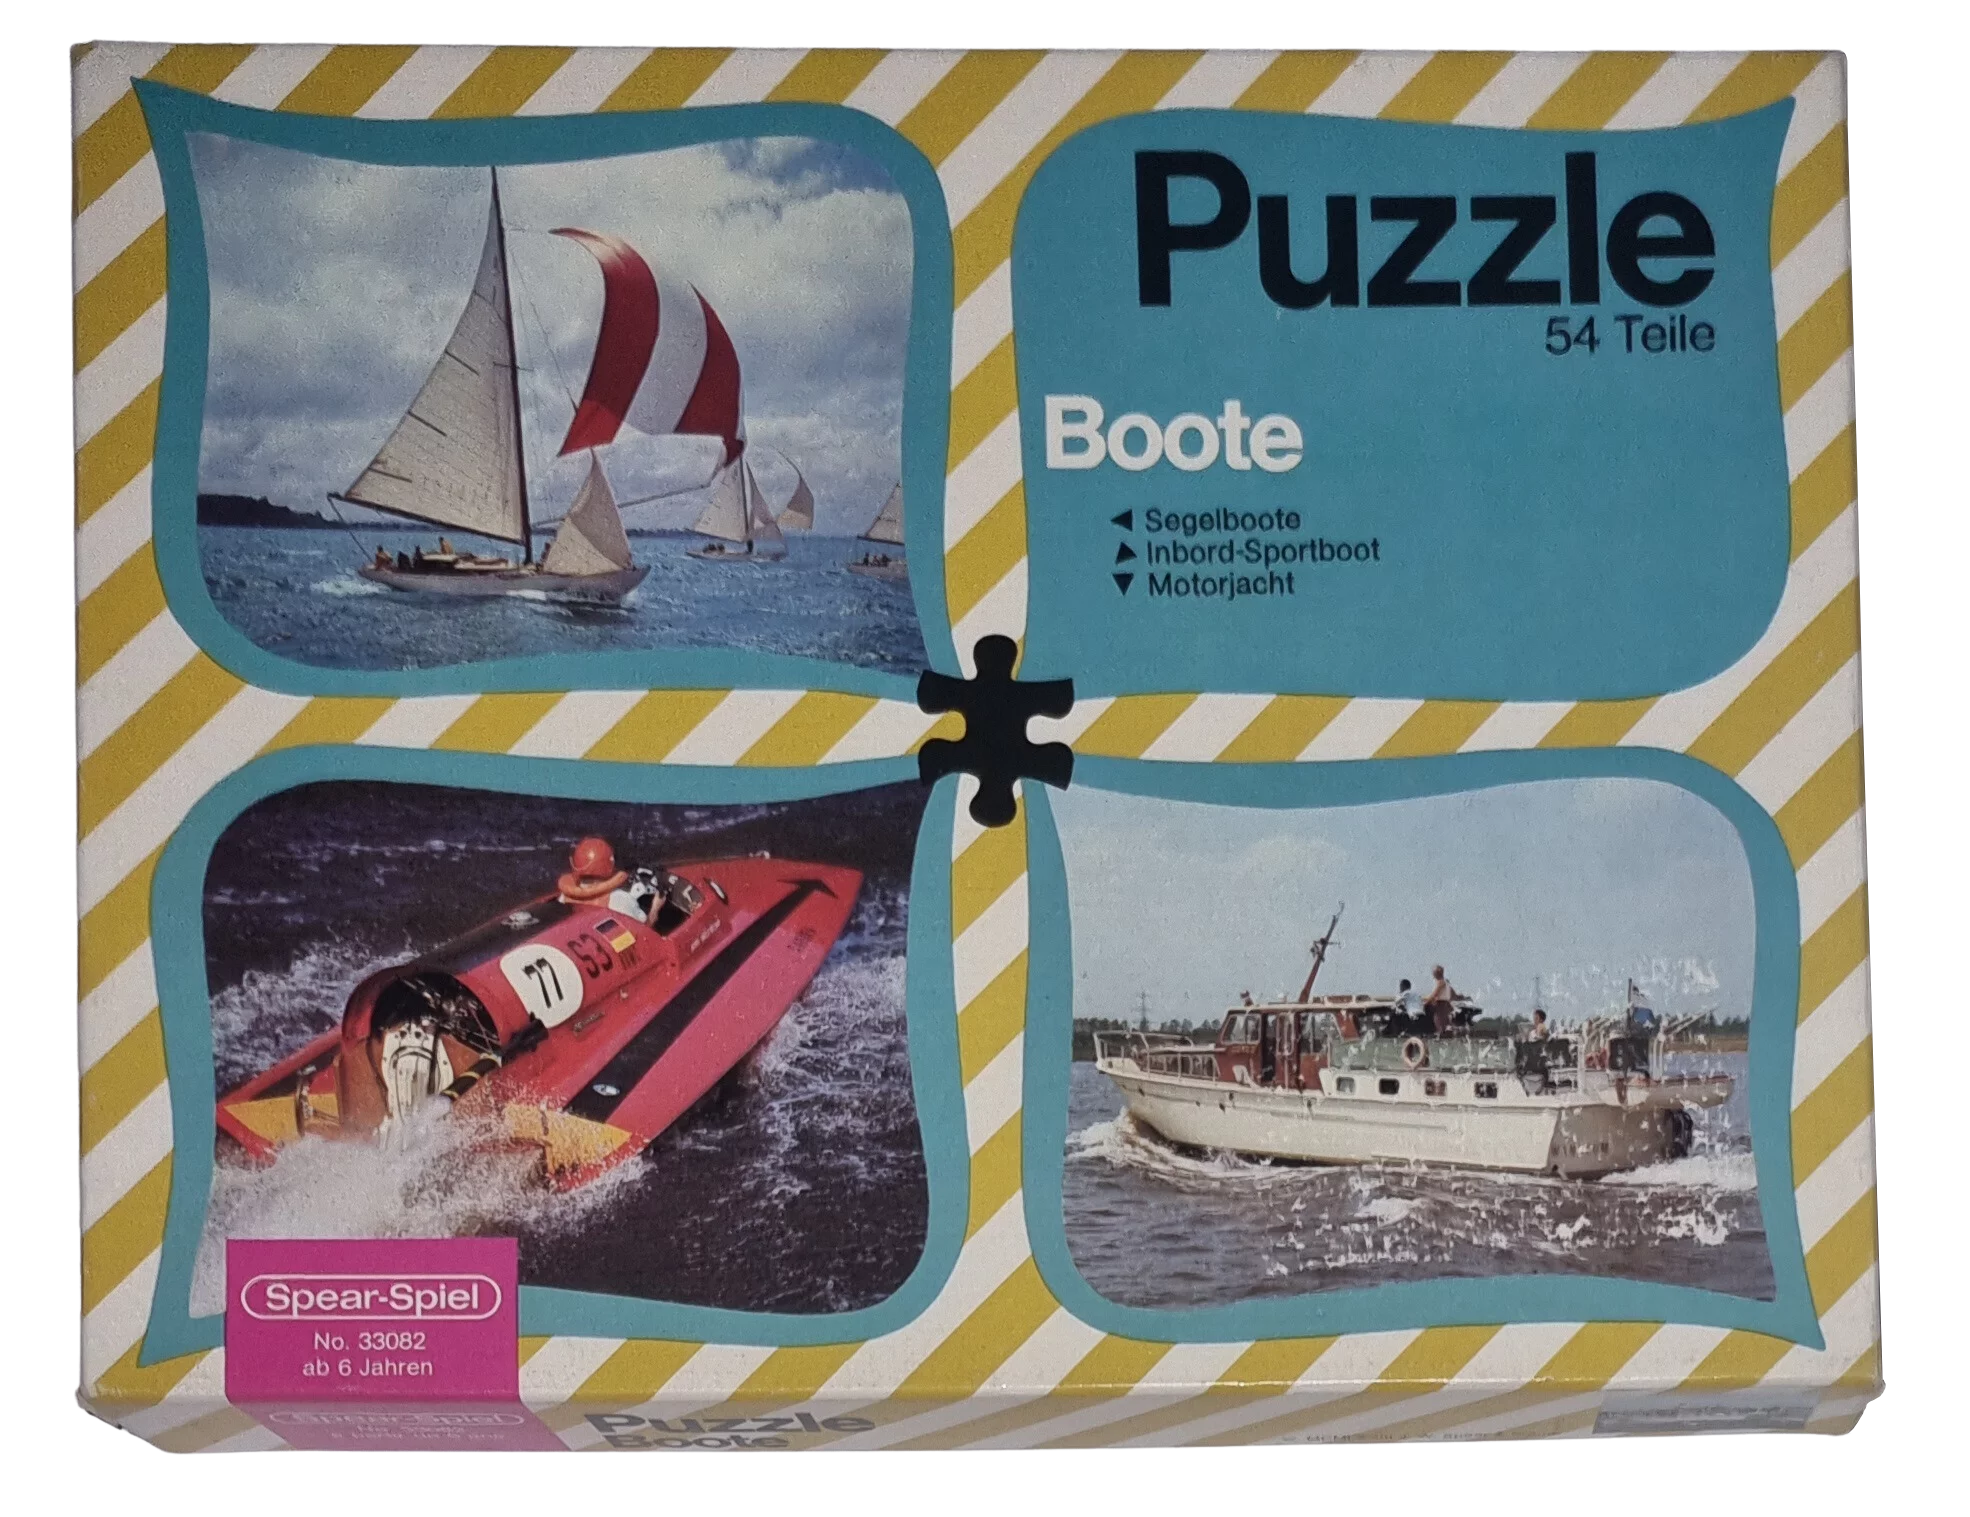 Spear-Spiel Puzzle Boote 54 Teile 33082